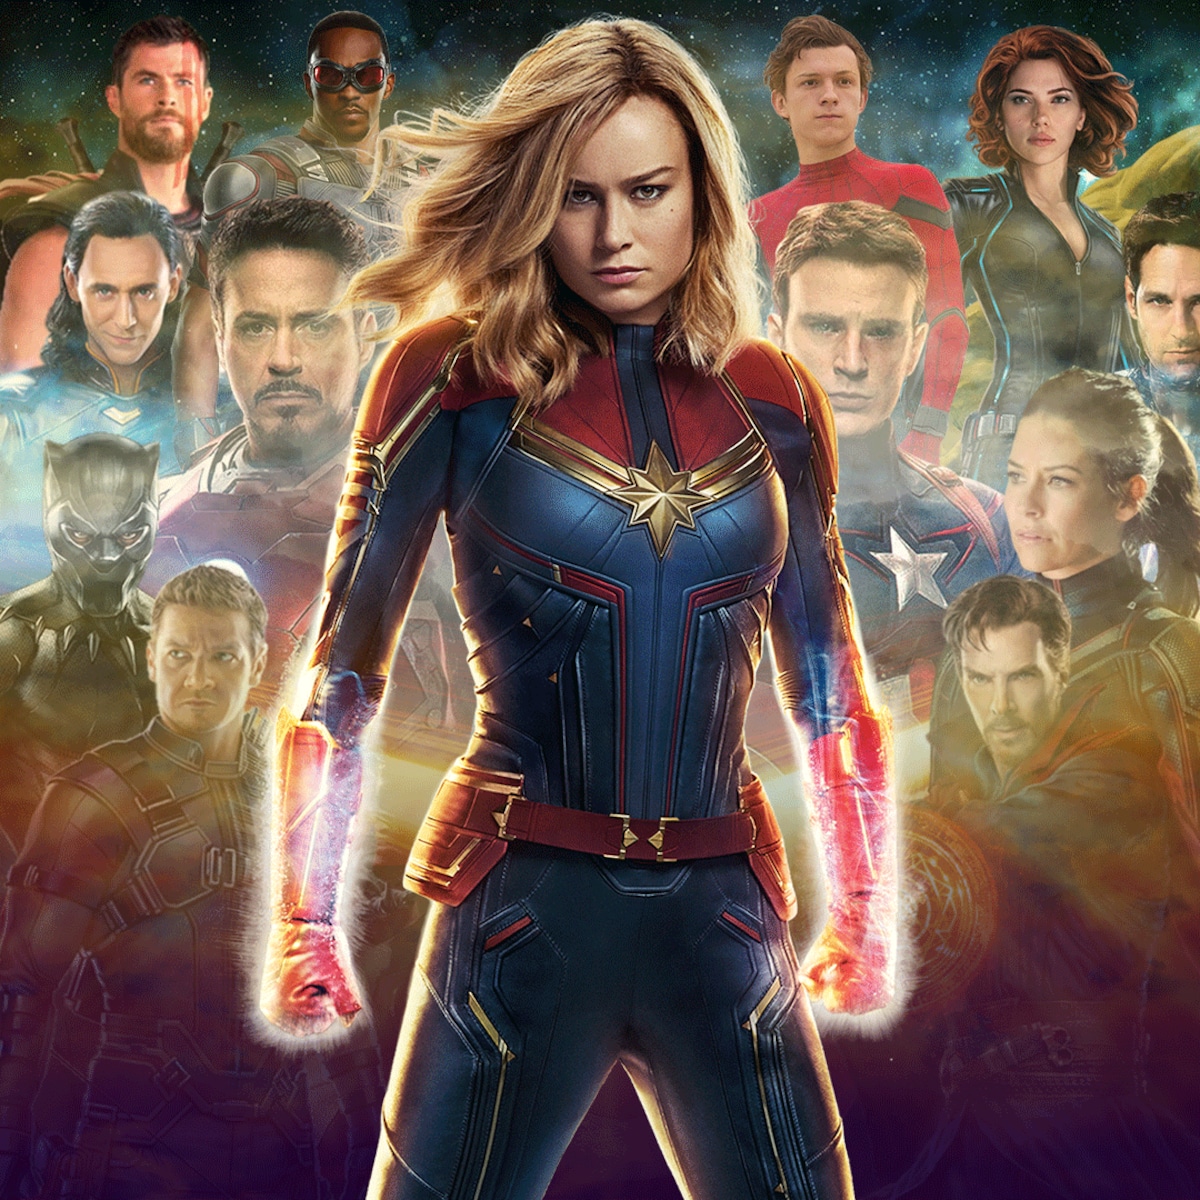 Avengers Endgame' cast: Who plays the Avengers characters in the movie